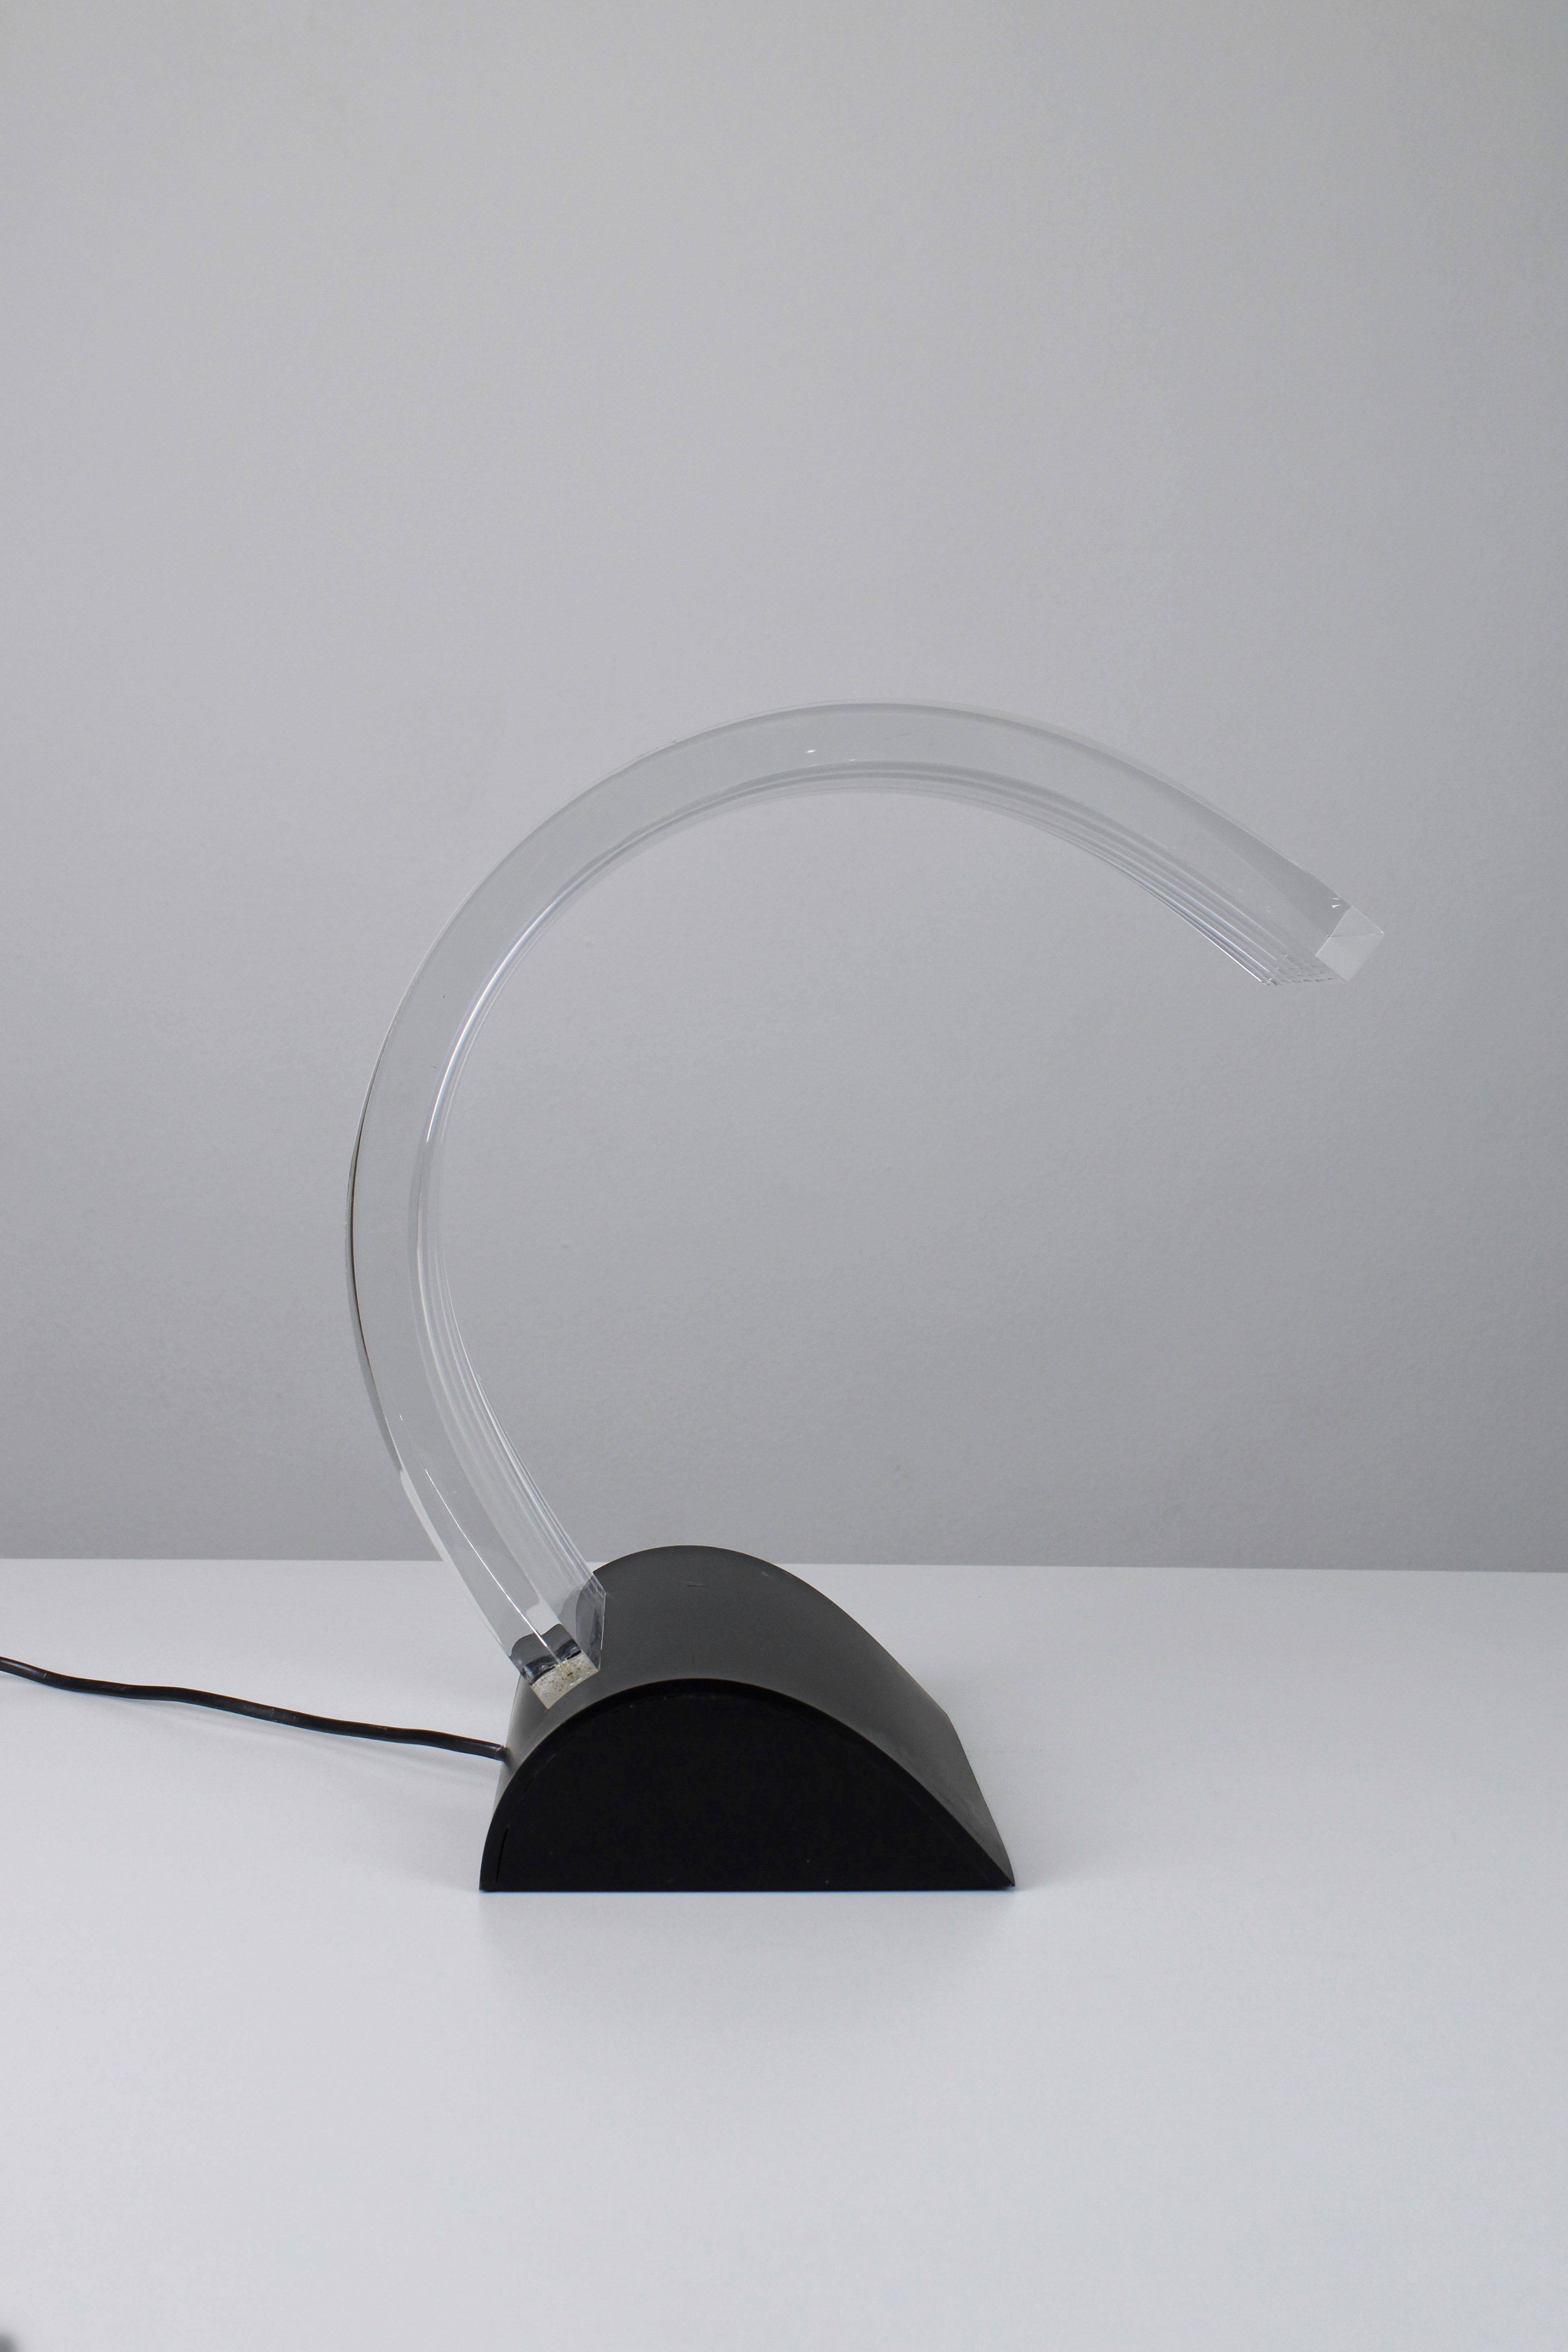 Dutch Lune Desk Lamp by Wout Wessemius, 1982